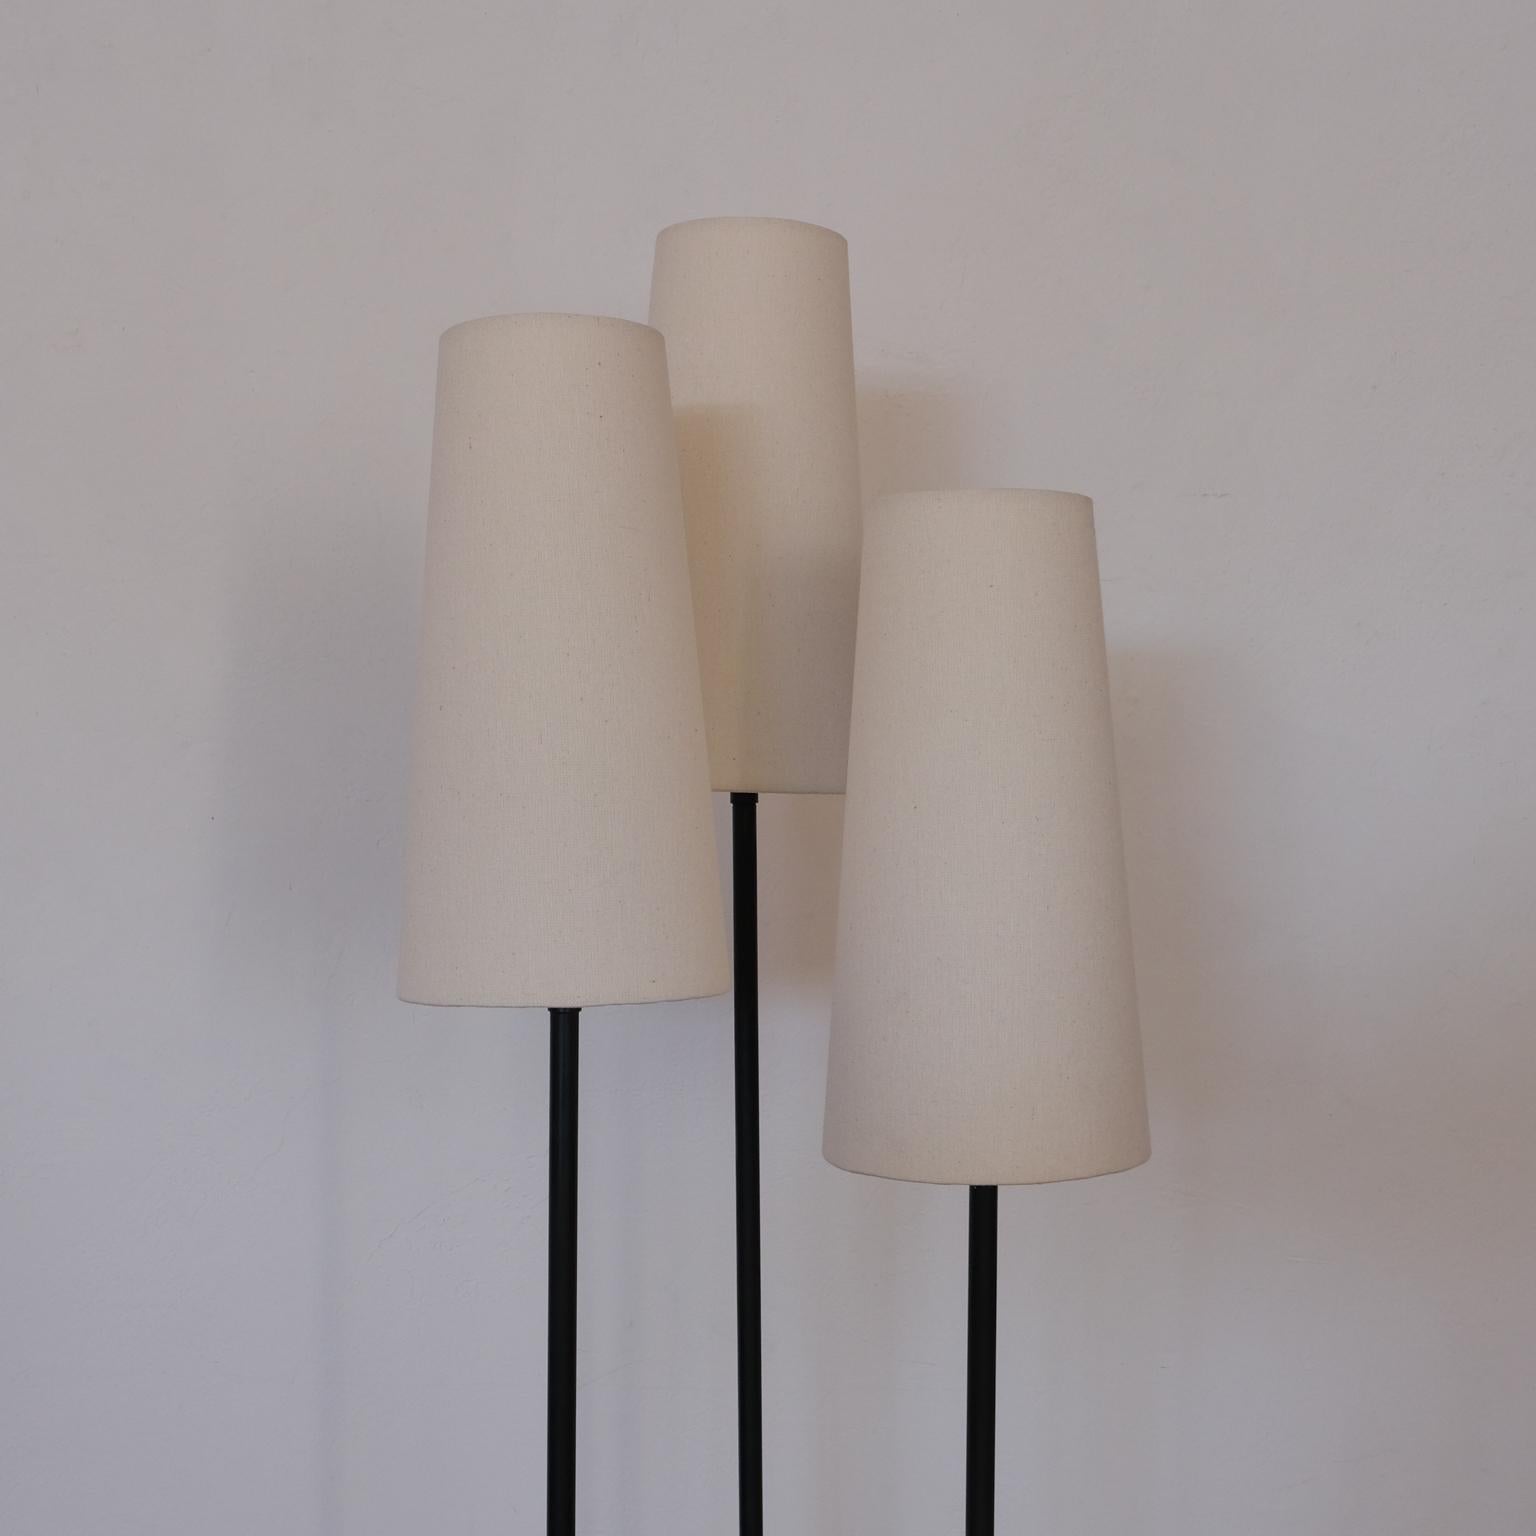 Mid-Century Modern Floor Torchiere Lamp by David Wurster, 1950s For Sale